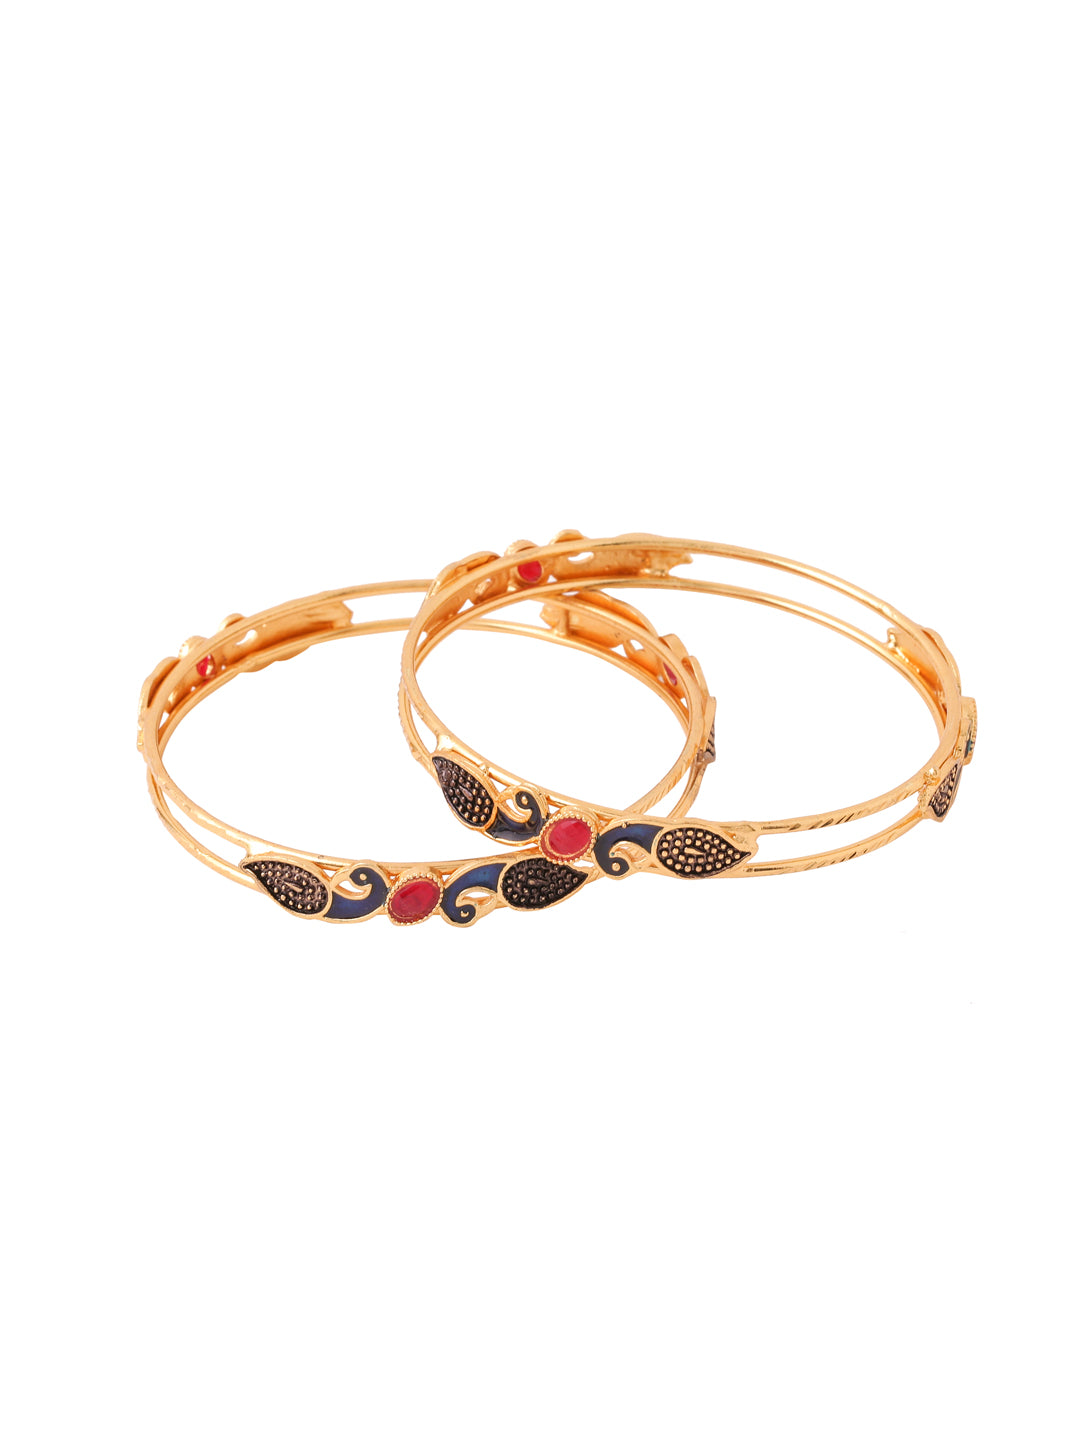 Women's Set Of 2 Gold-Plated Traditional Daily use Peacock Design Bangles - NVR